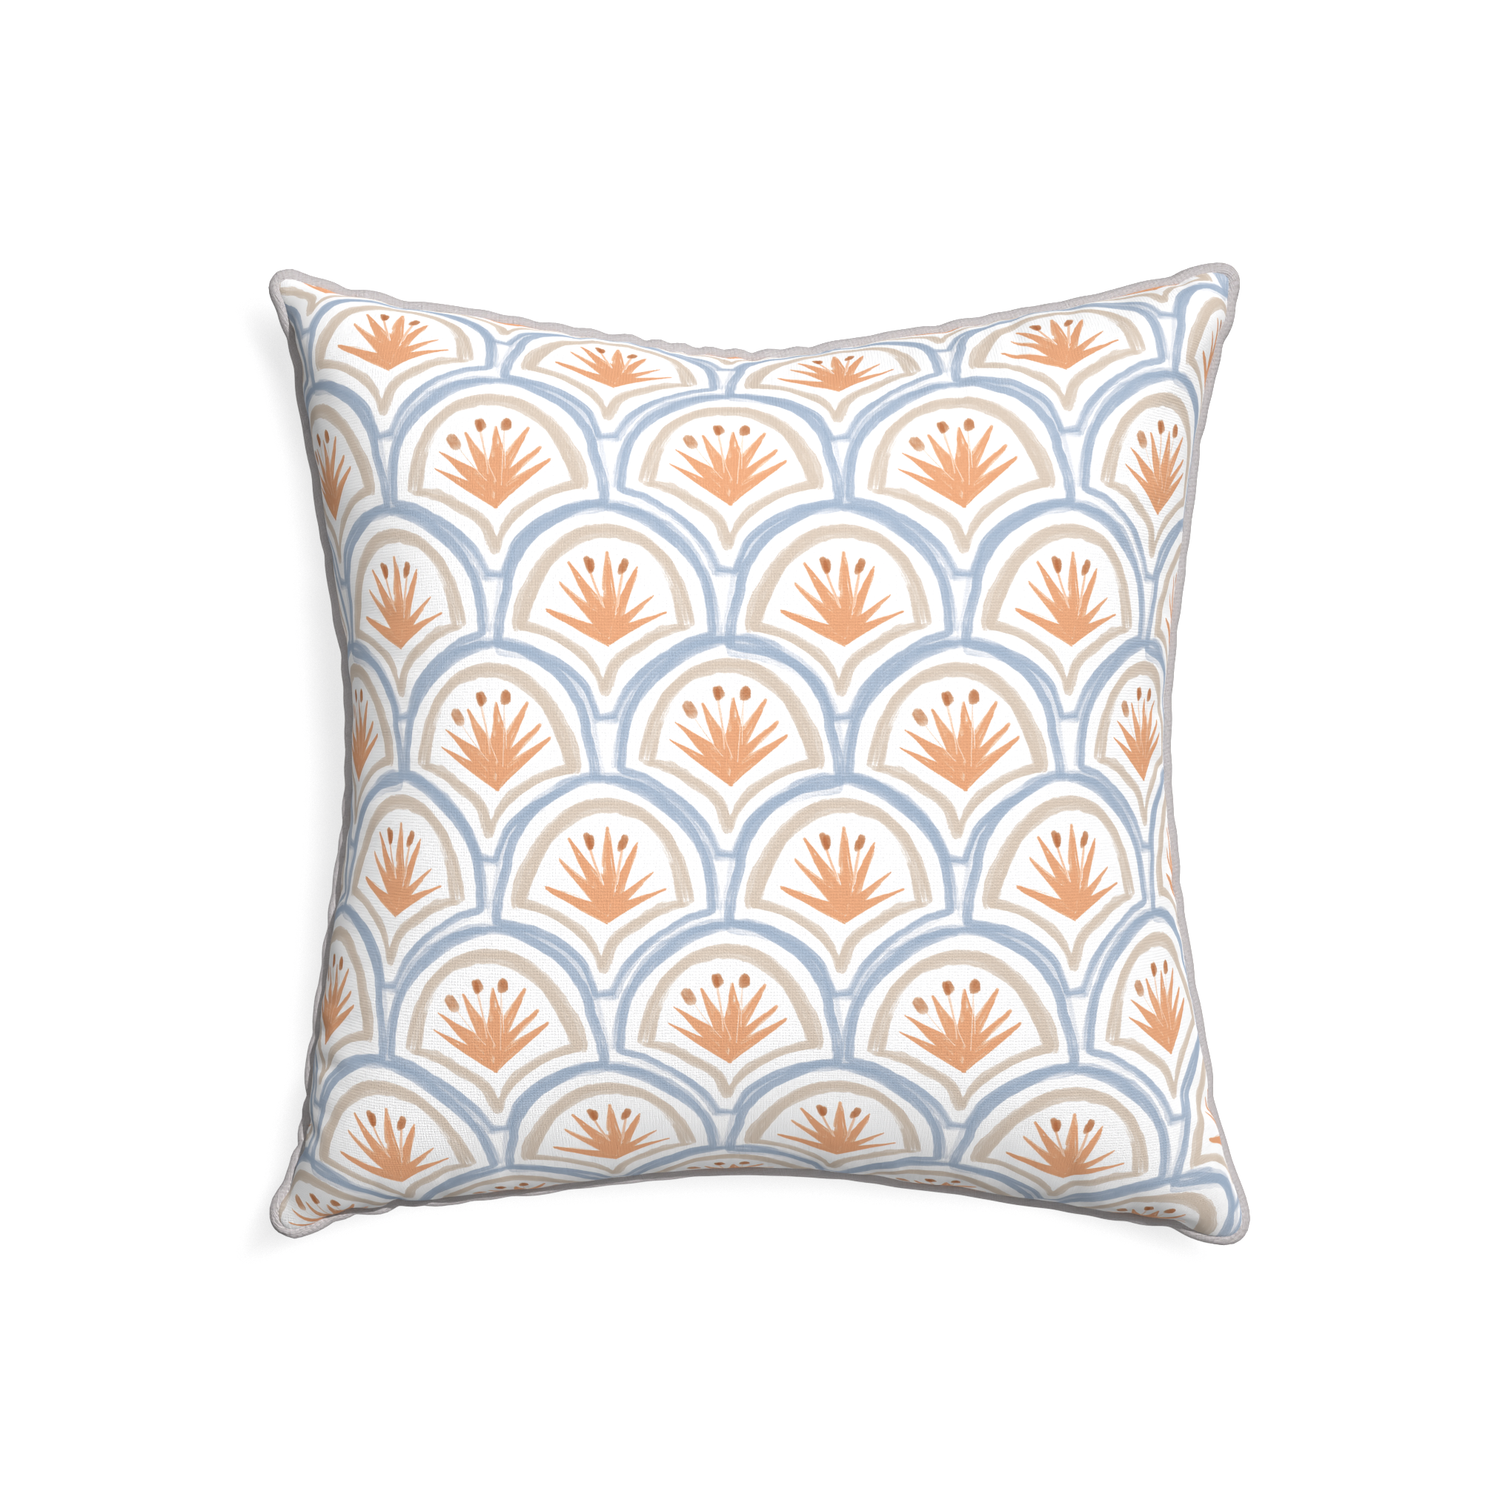 22-square thatcher apricot custom pillow with pebble piping on white background